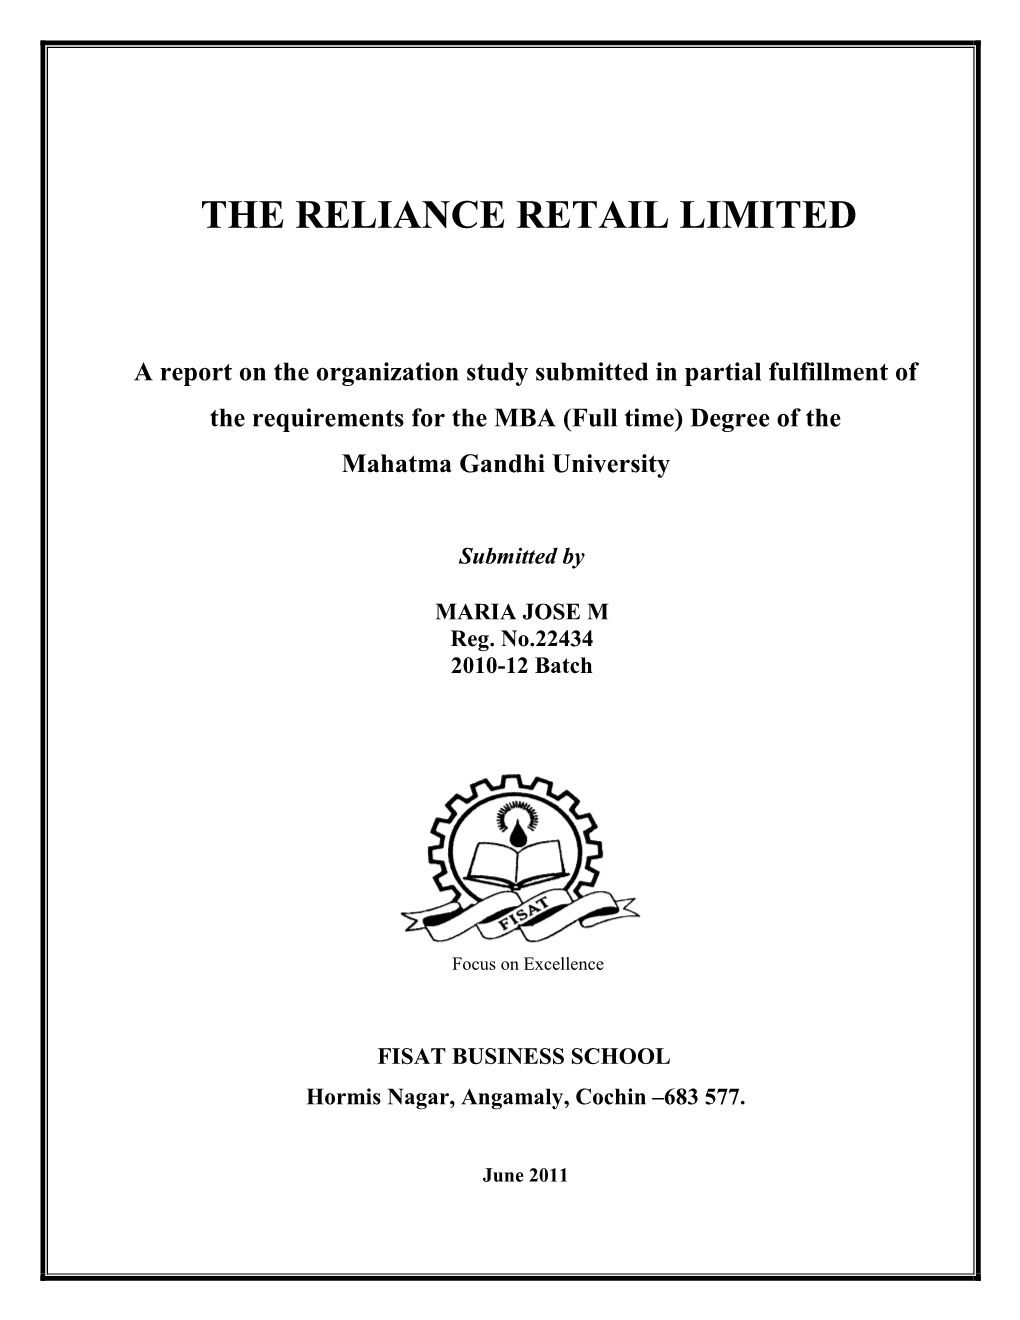 The Reliance Retail Limited